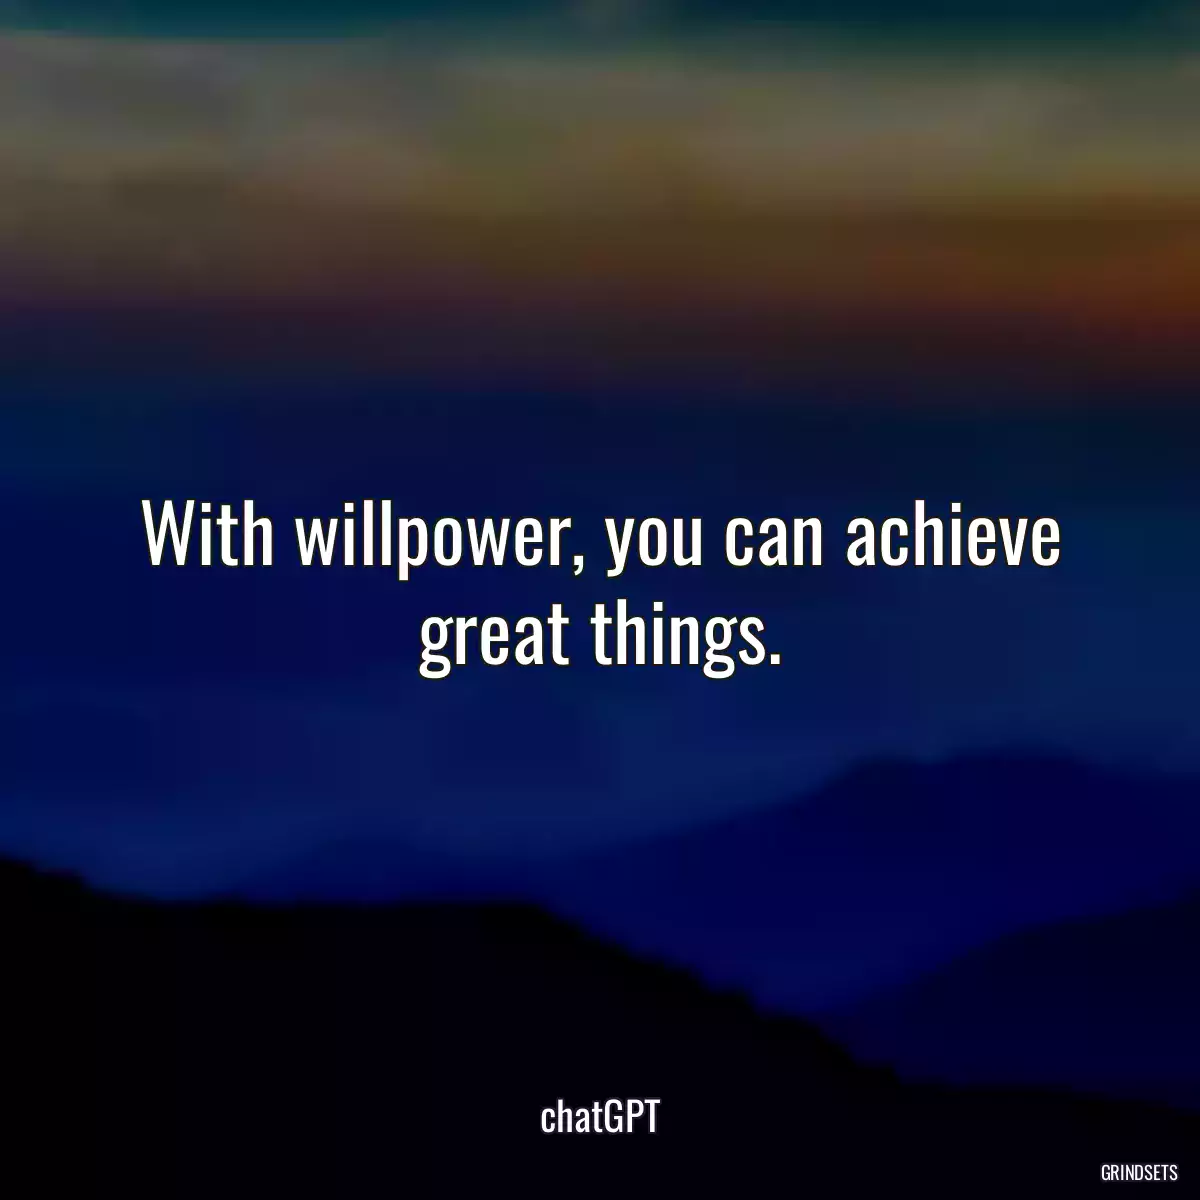 With willpower, you can achieve great things.